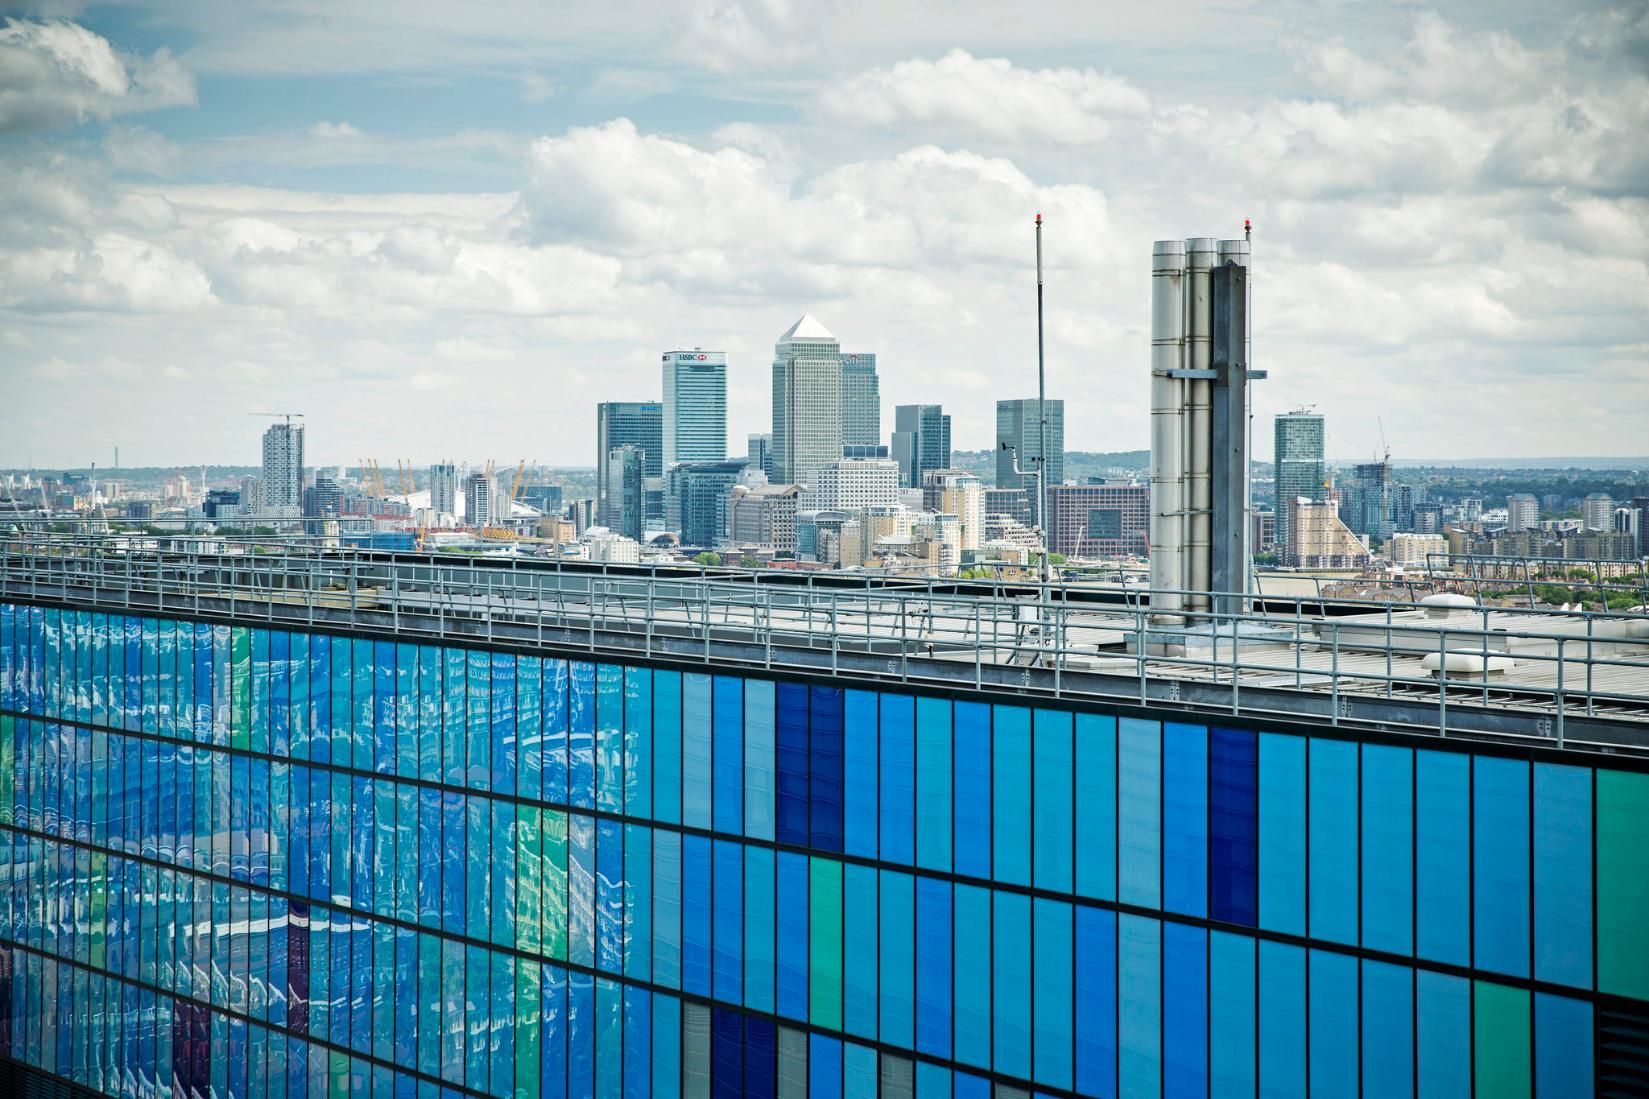 View of London with a blue building in the foreground